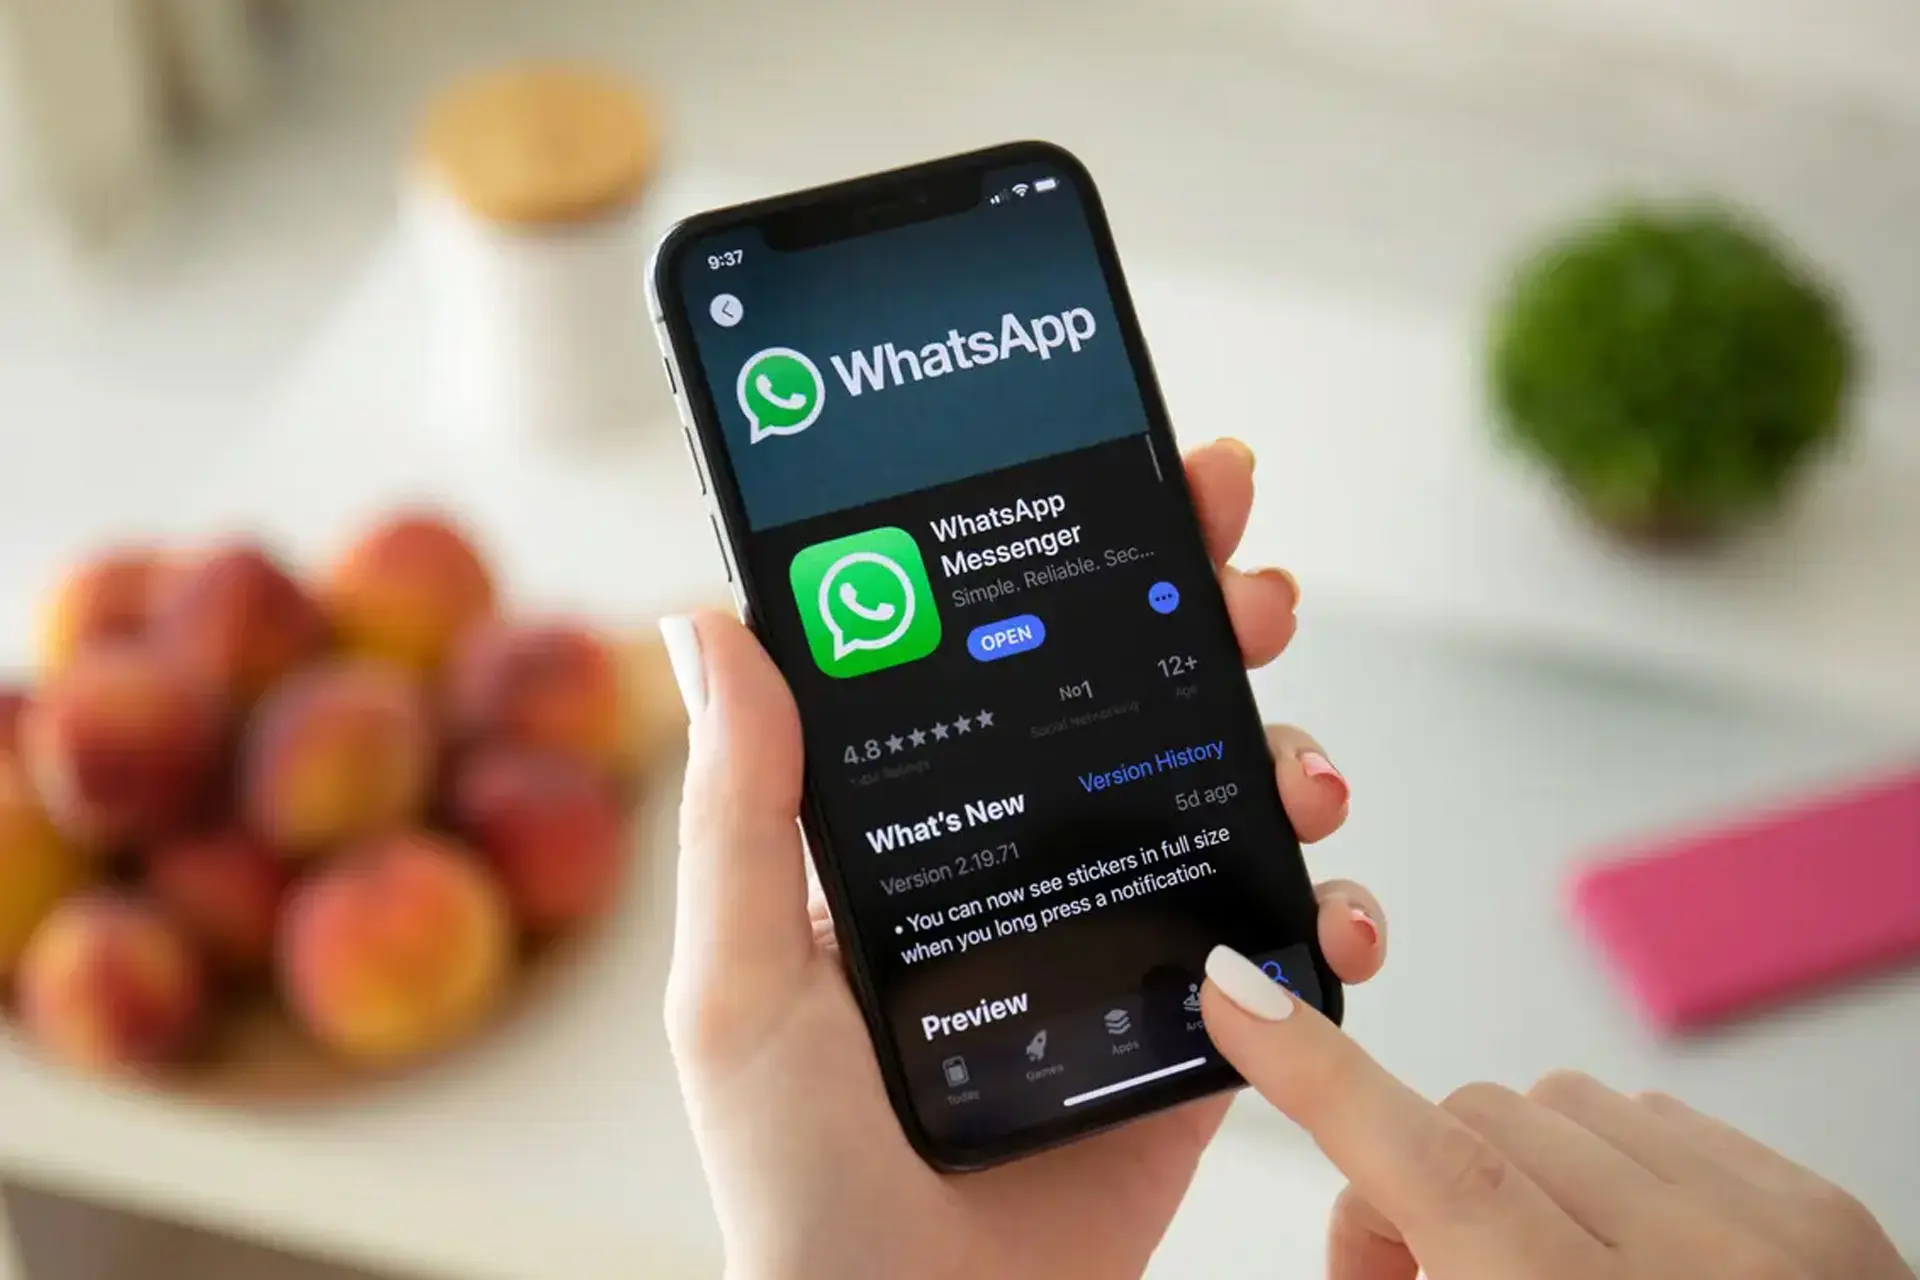 Now You Can Use One WhatsApp Account On Multiple Phones